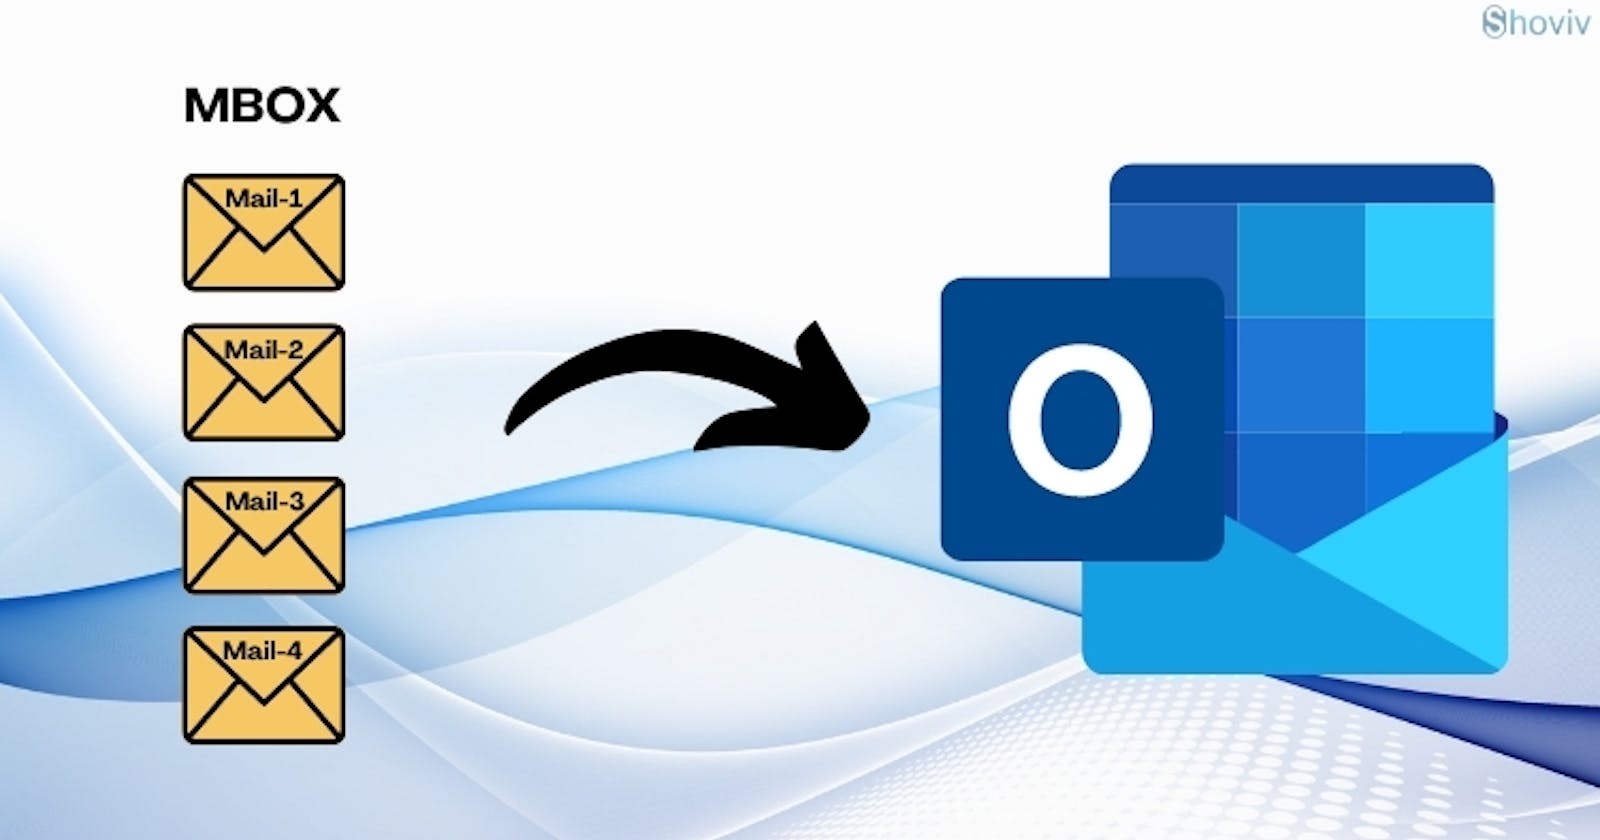 How to Import MBOX Files into Outlook App & Outlook.com?